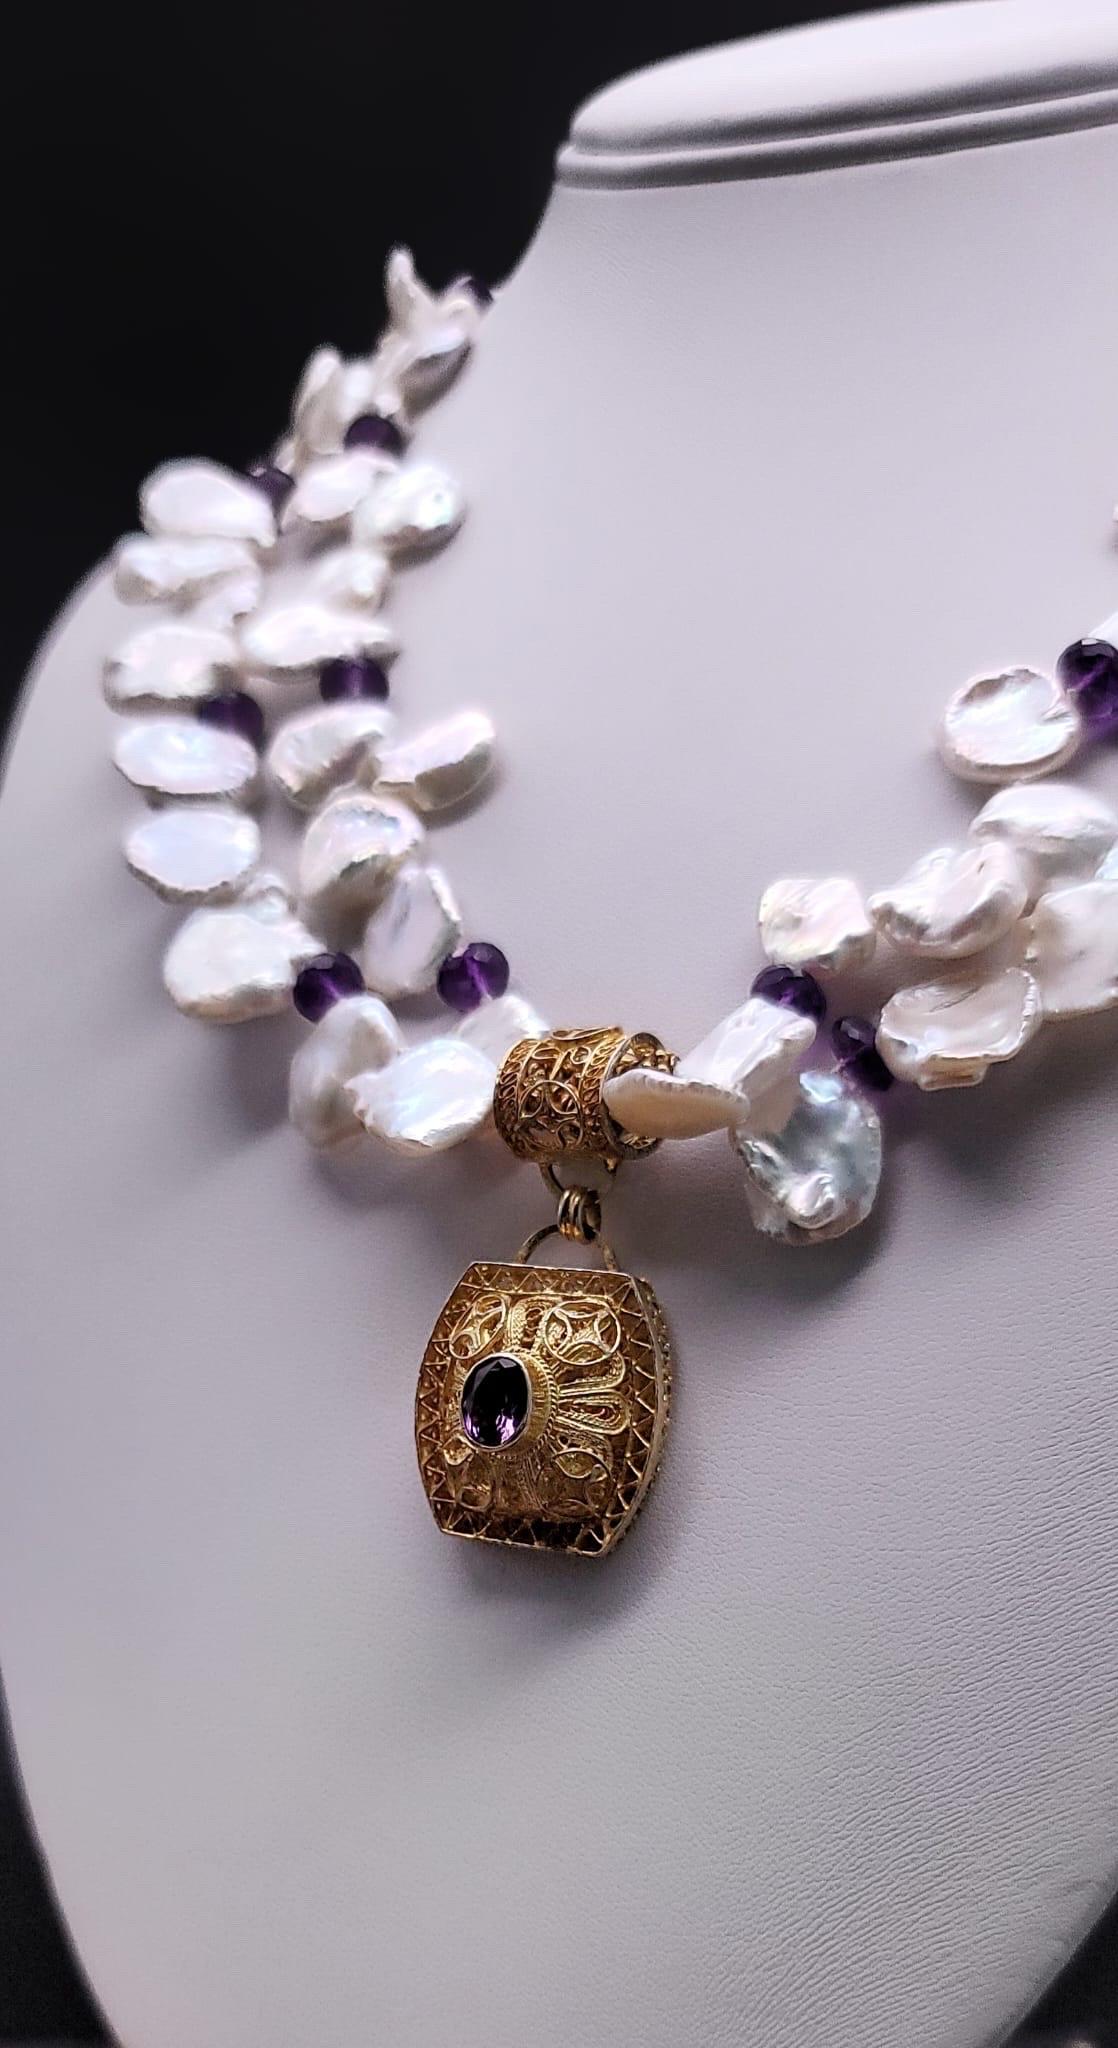 One-of-a-Kind

Twisted Keshi Pearl and Amethyst double strand necklace anchored by a wonderful vermeil filagree and Amethyst pendant designed by Barbara Garwood and handmade, under her supervision, by craftswomen in a small village near Chinese